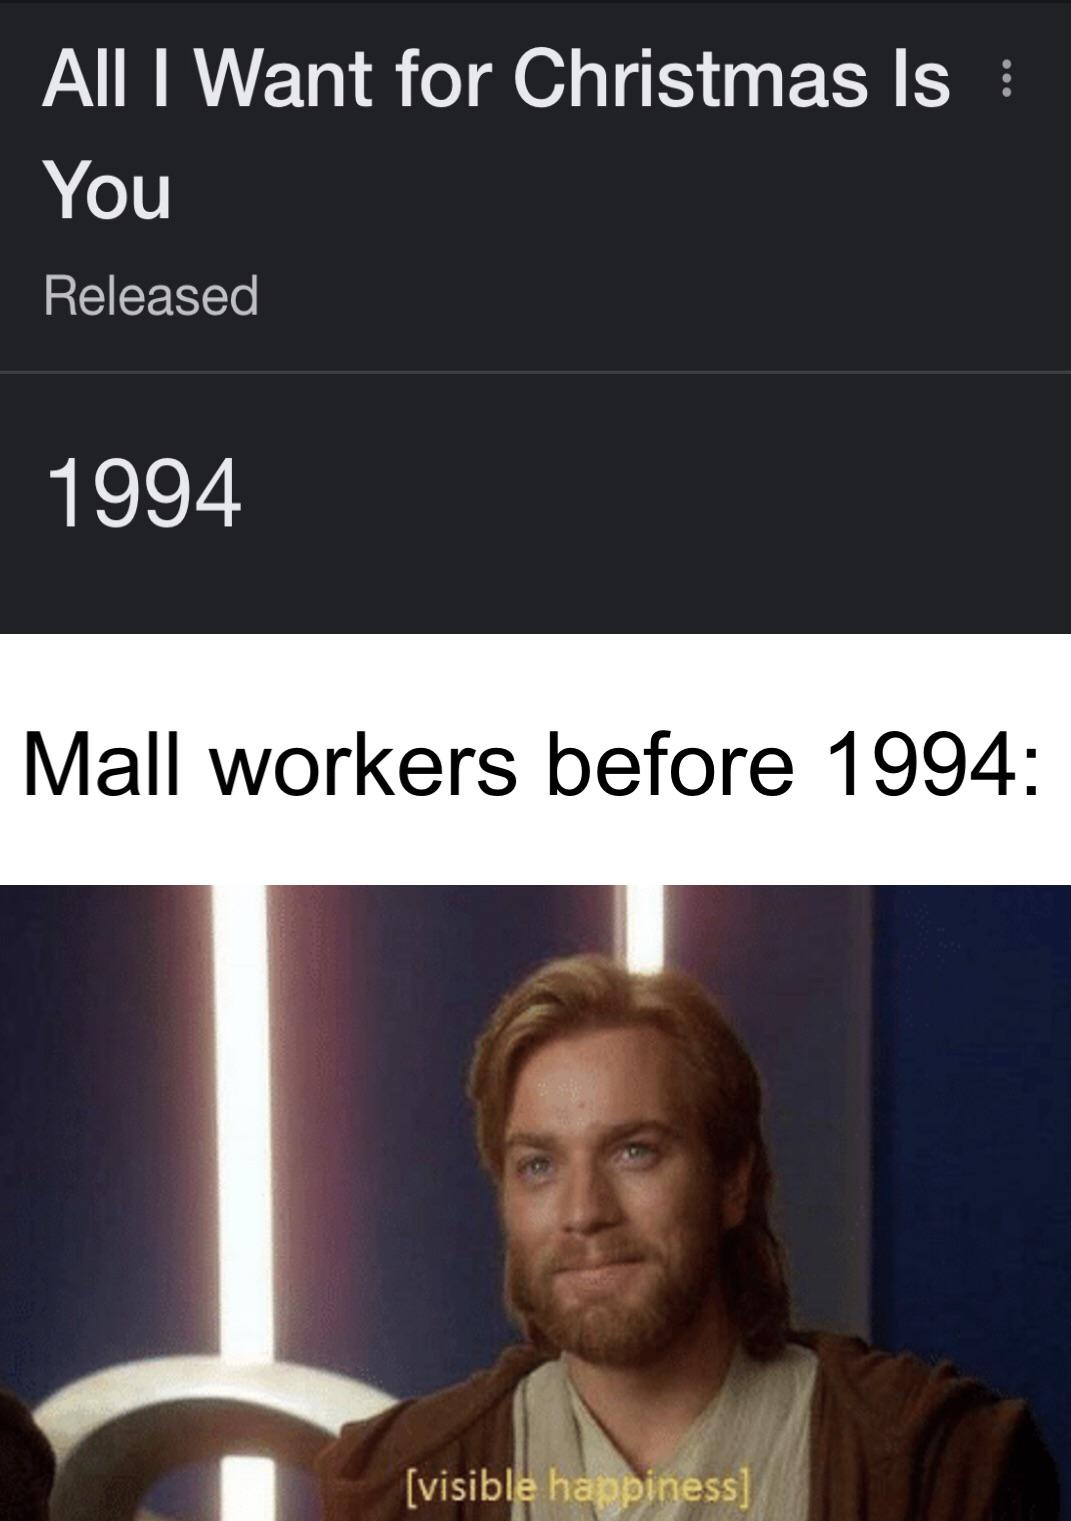 dank memes and funny pics - photo caption - All I Want for Christmas Is You Released 1994 Mall workers before 1994 visible happiness